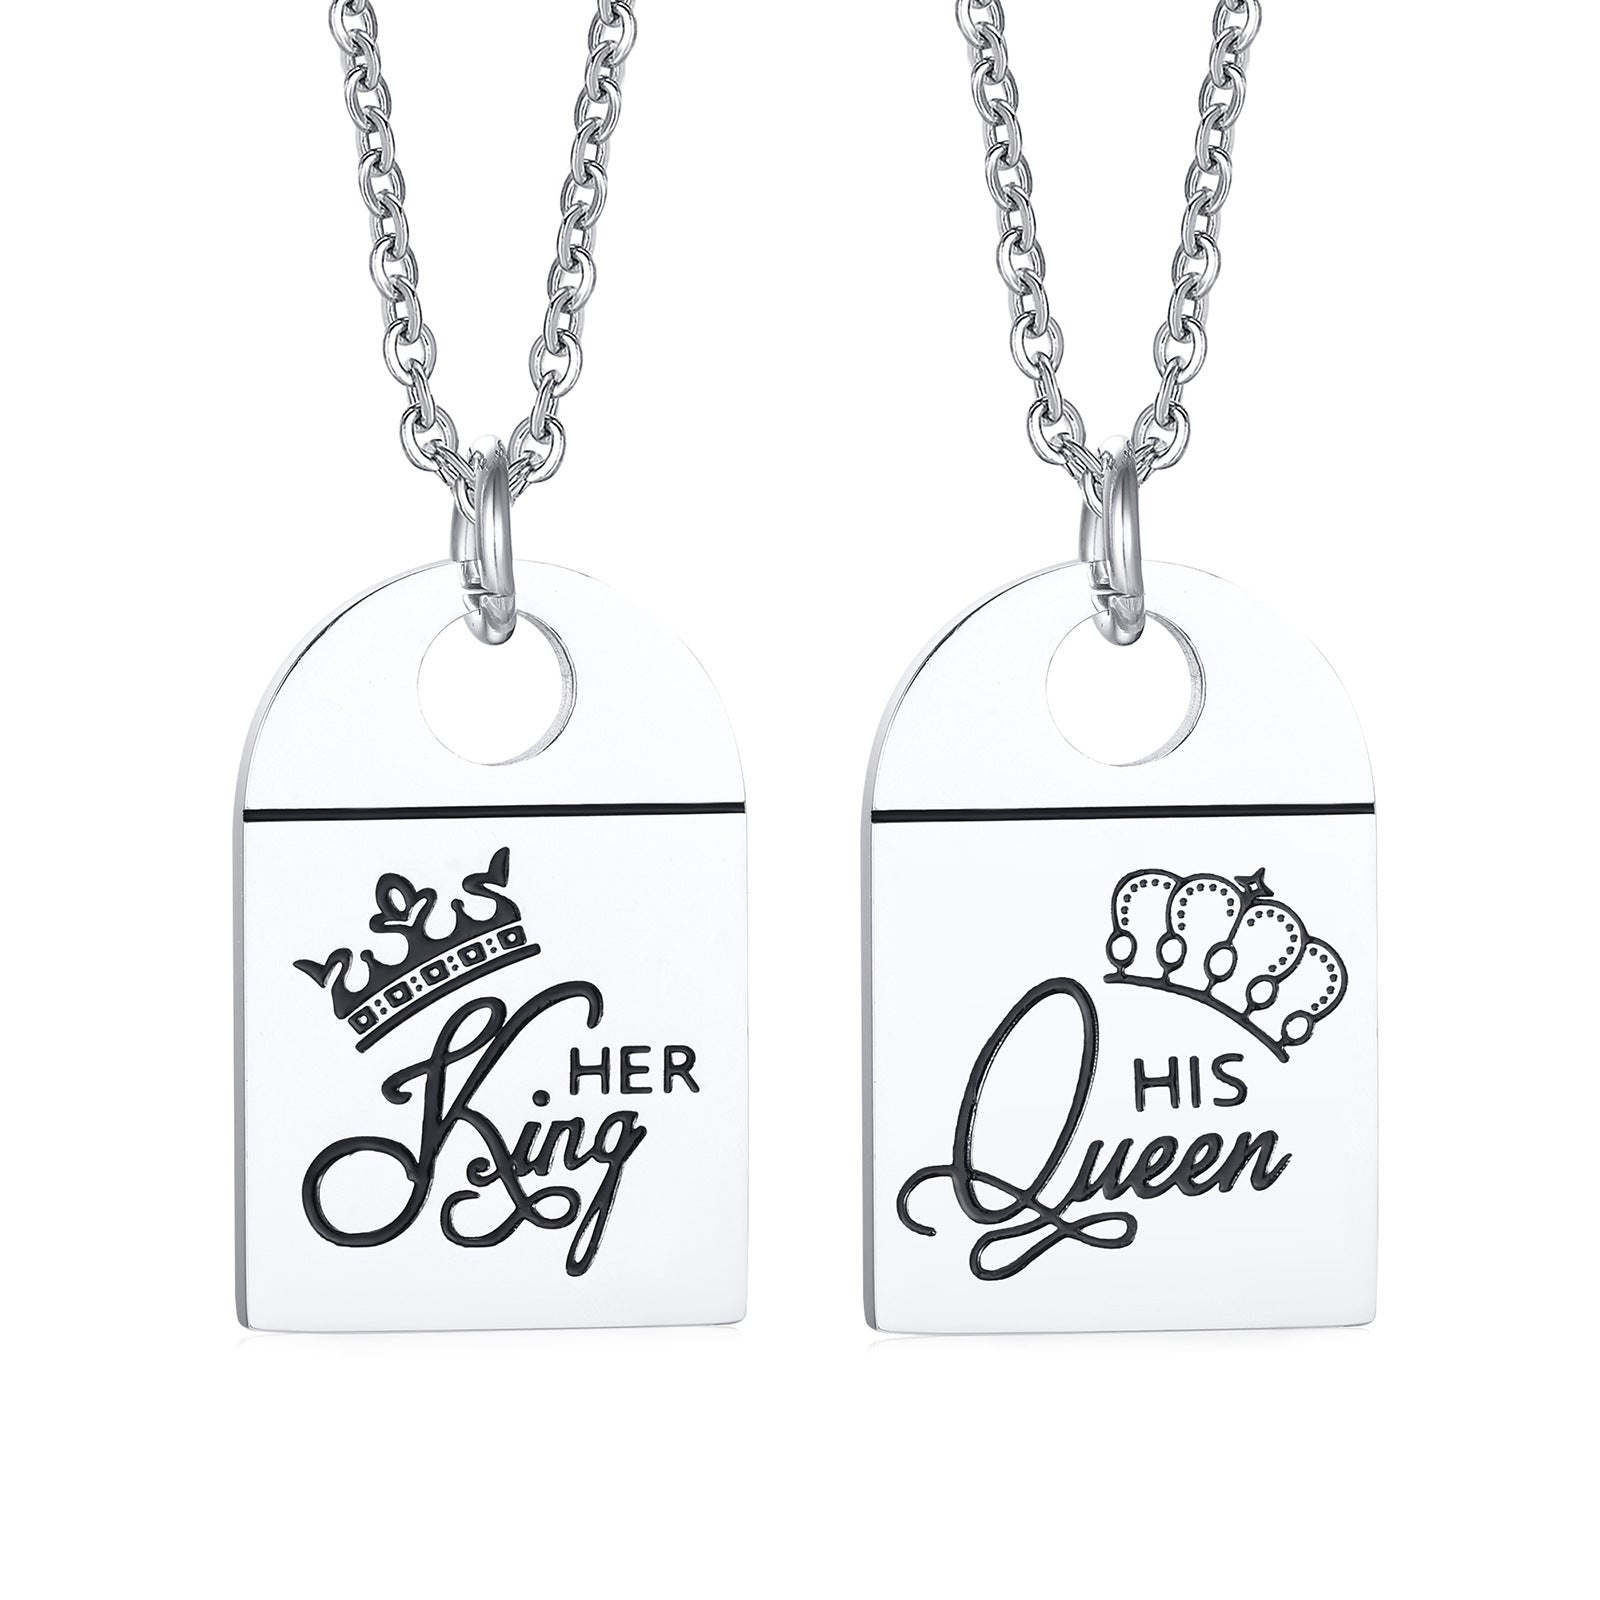 His Queen Her King Matching Couples Necklaces & Bracelets – CoupleGifts.com